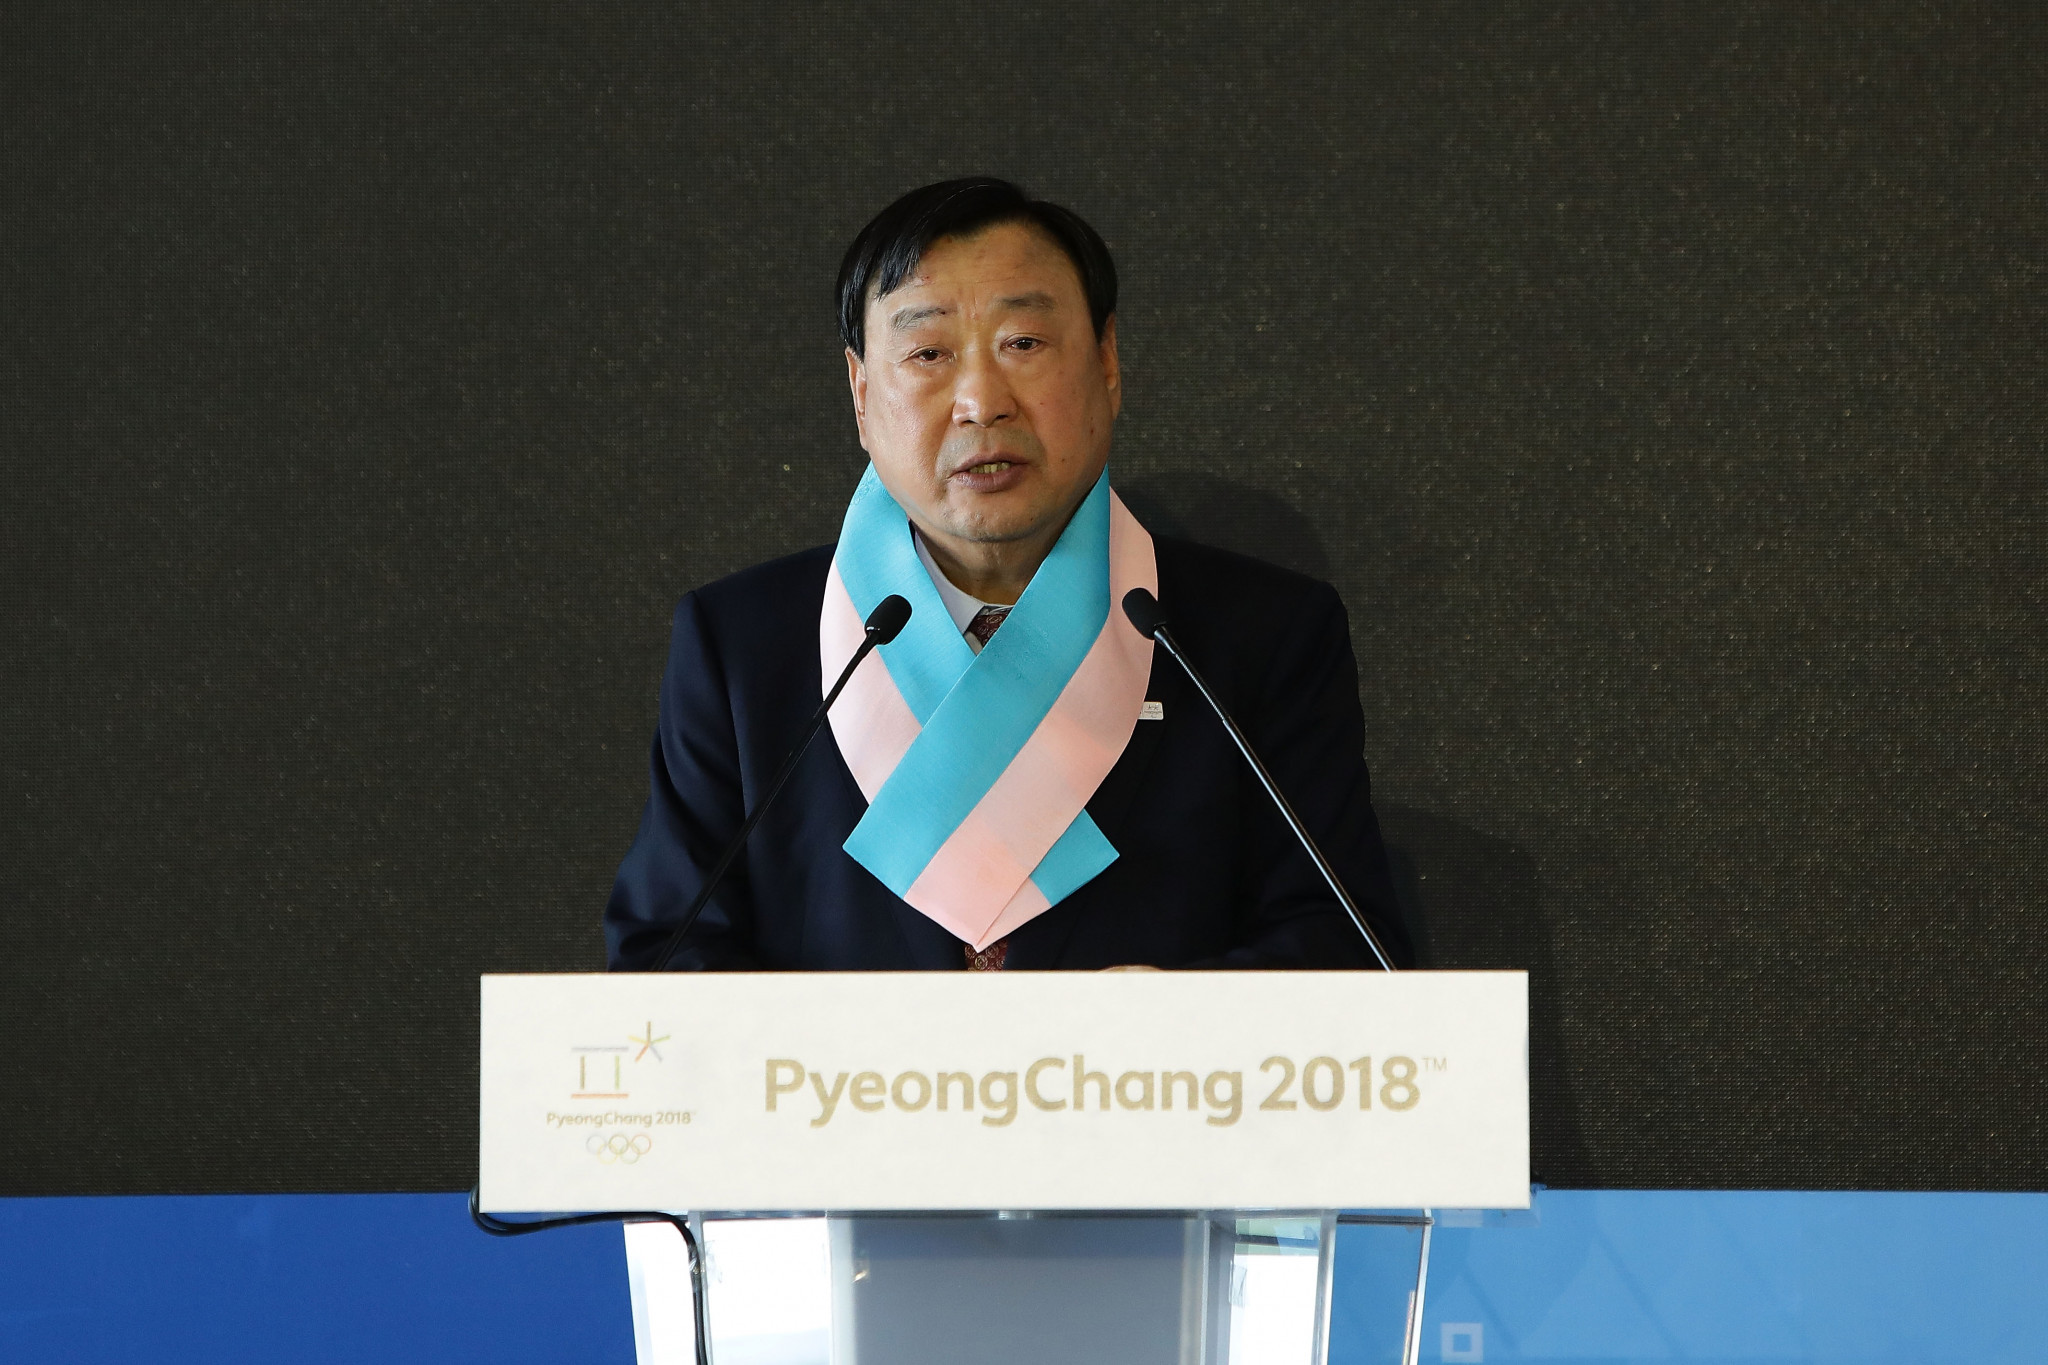 Pyeongchang 2018 President urges IPC to support participation application from North Korea